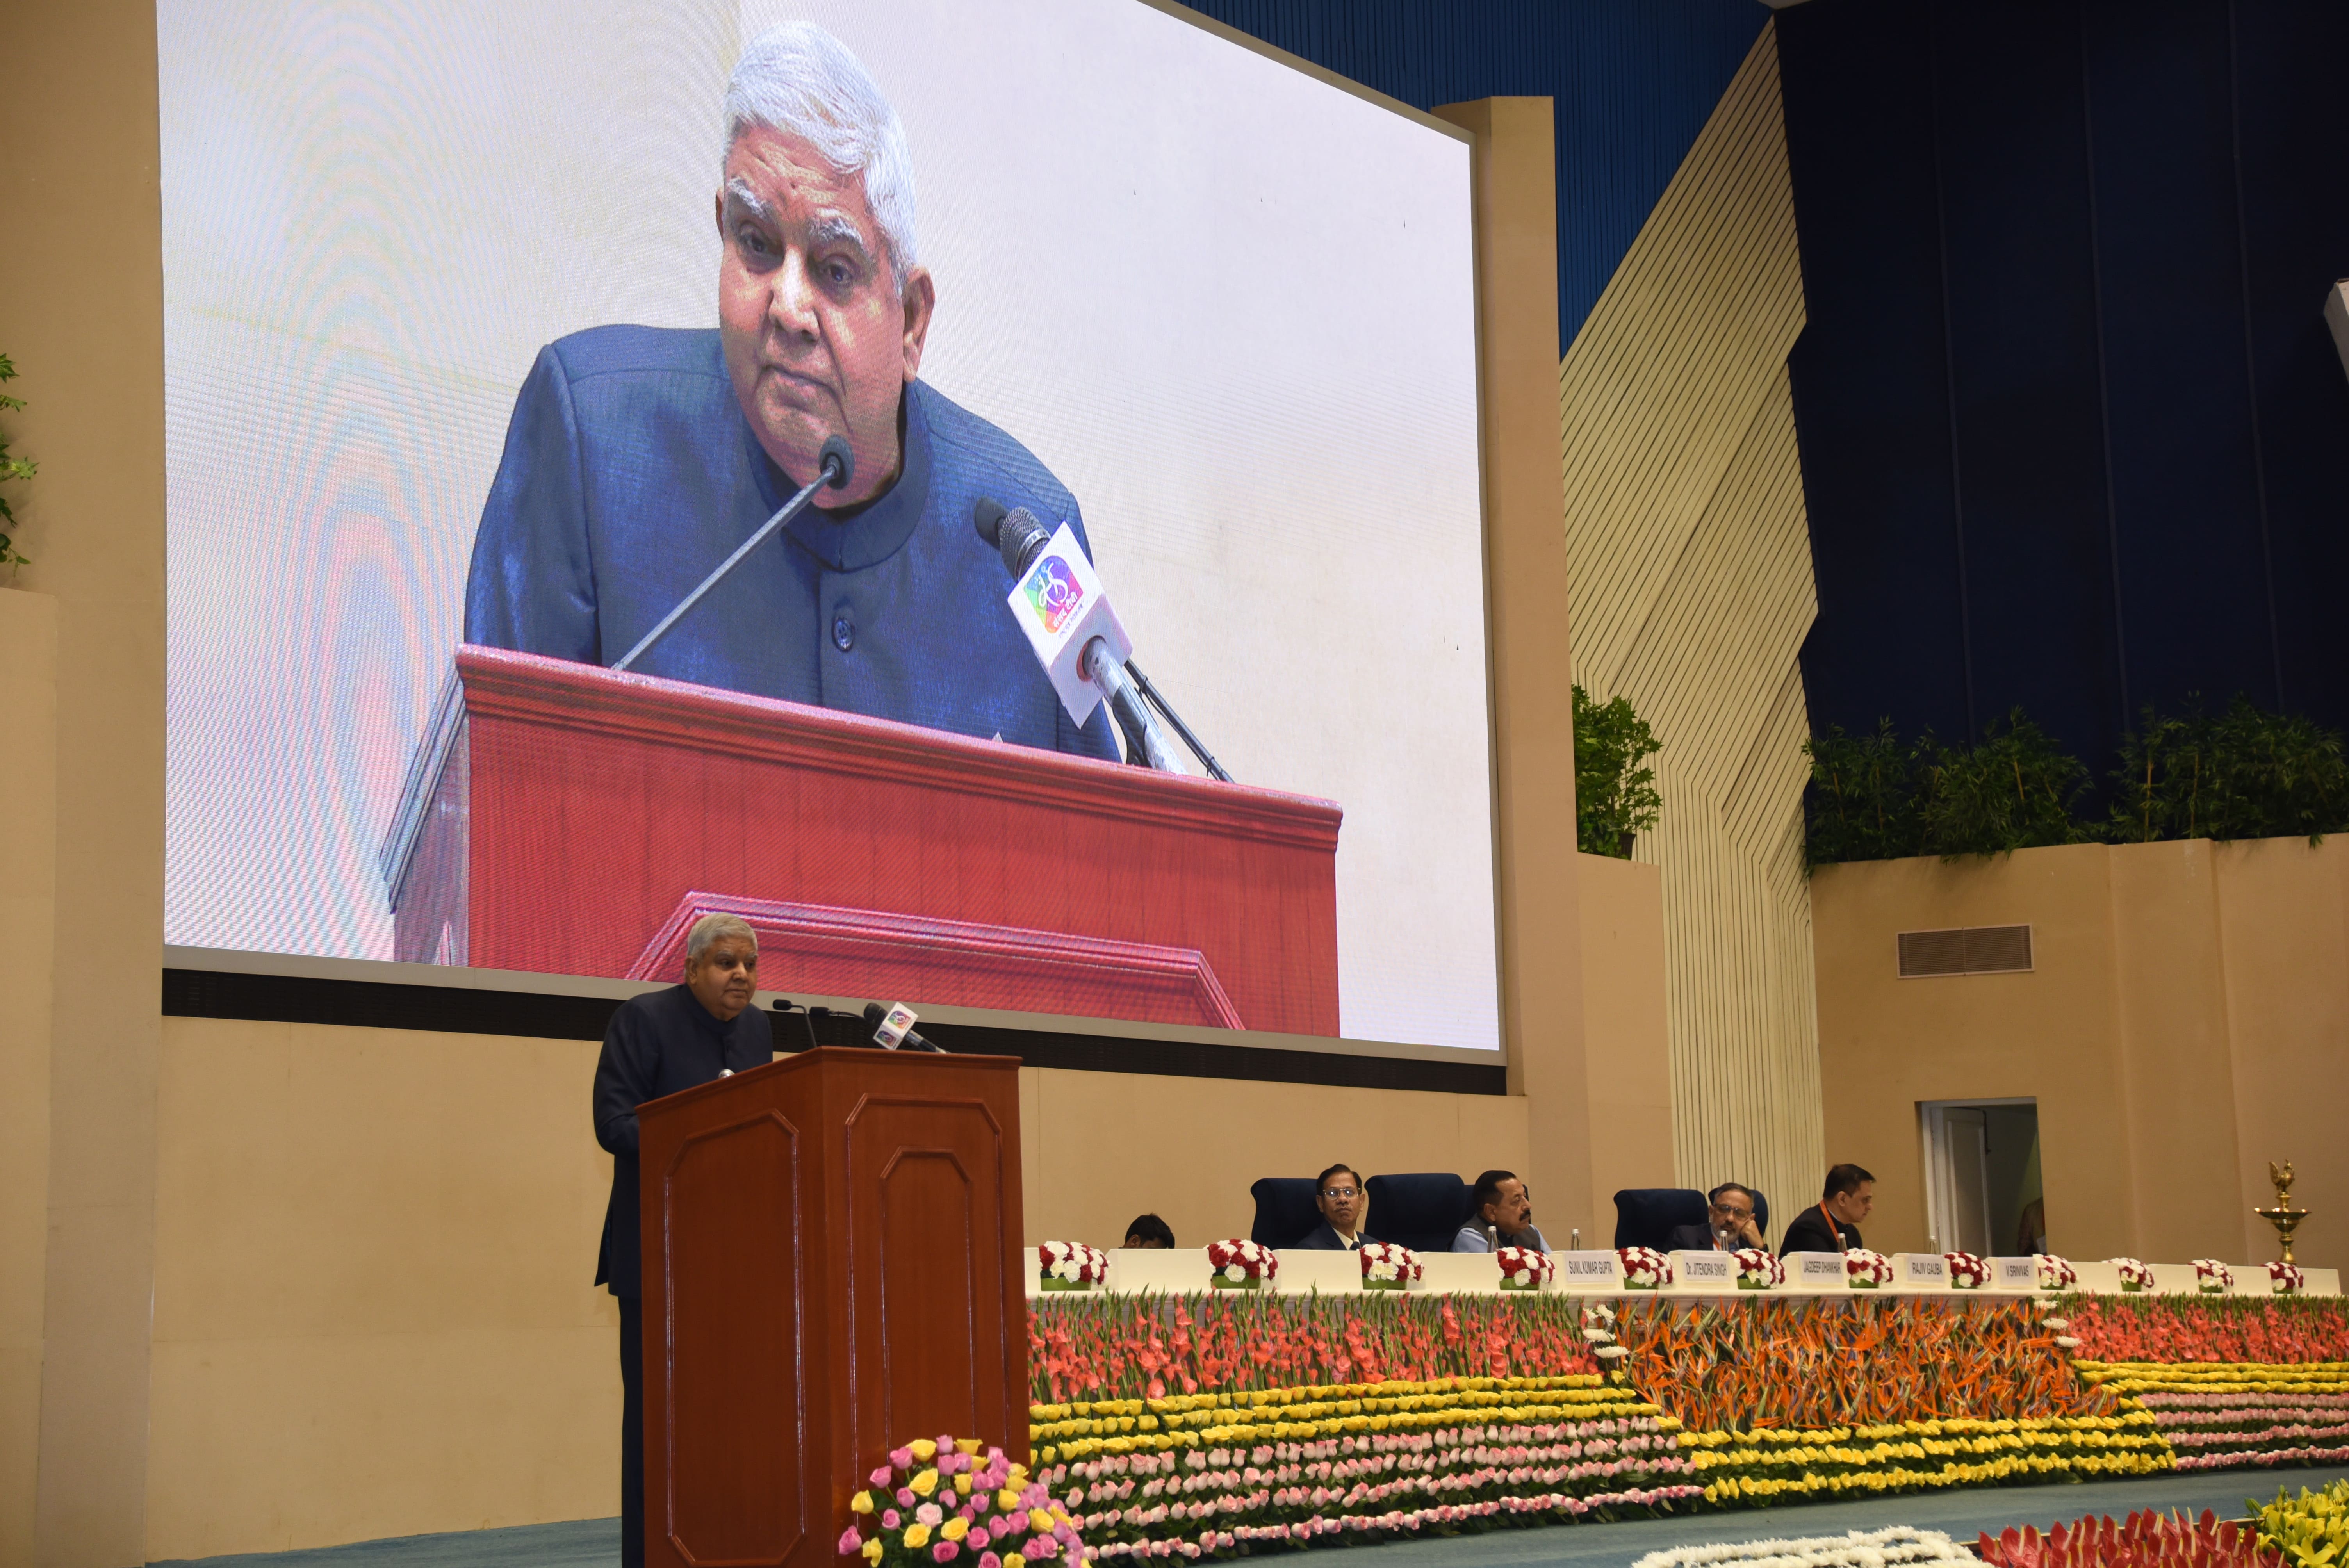 The Vice President, Shri Jagdeep Dhankhar addressing a gathering at the inaugural ceremony of the 16th Civil Services Day at Vigyan Bhawan in New Delhi on April 20, 2023.